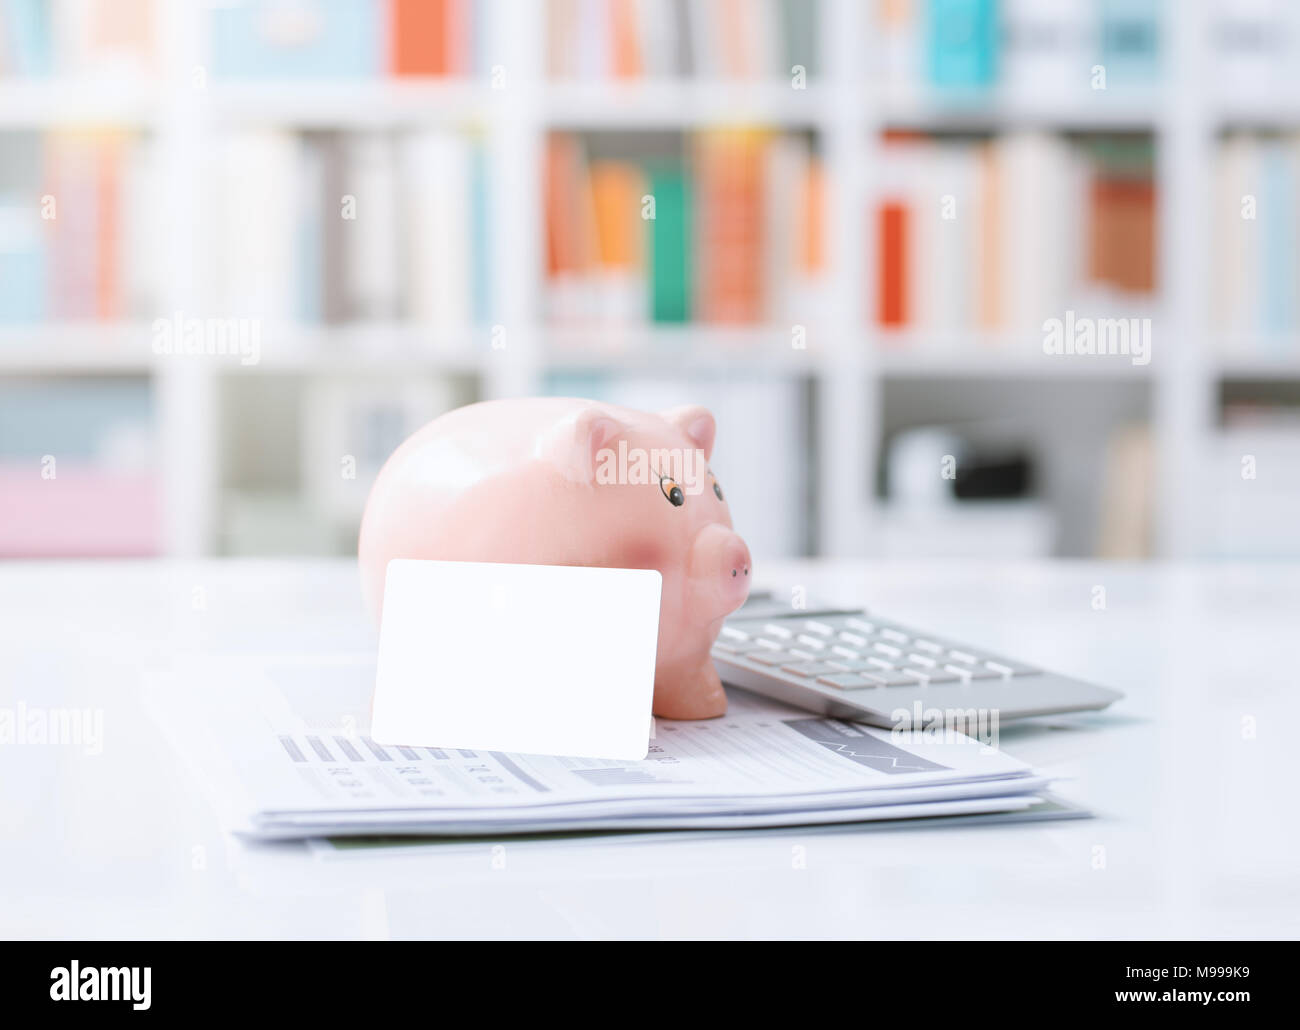 Piggy bank, credit card, calculator and financial report on a office desktop: savings, investments and bank deposit concept Stock Photo